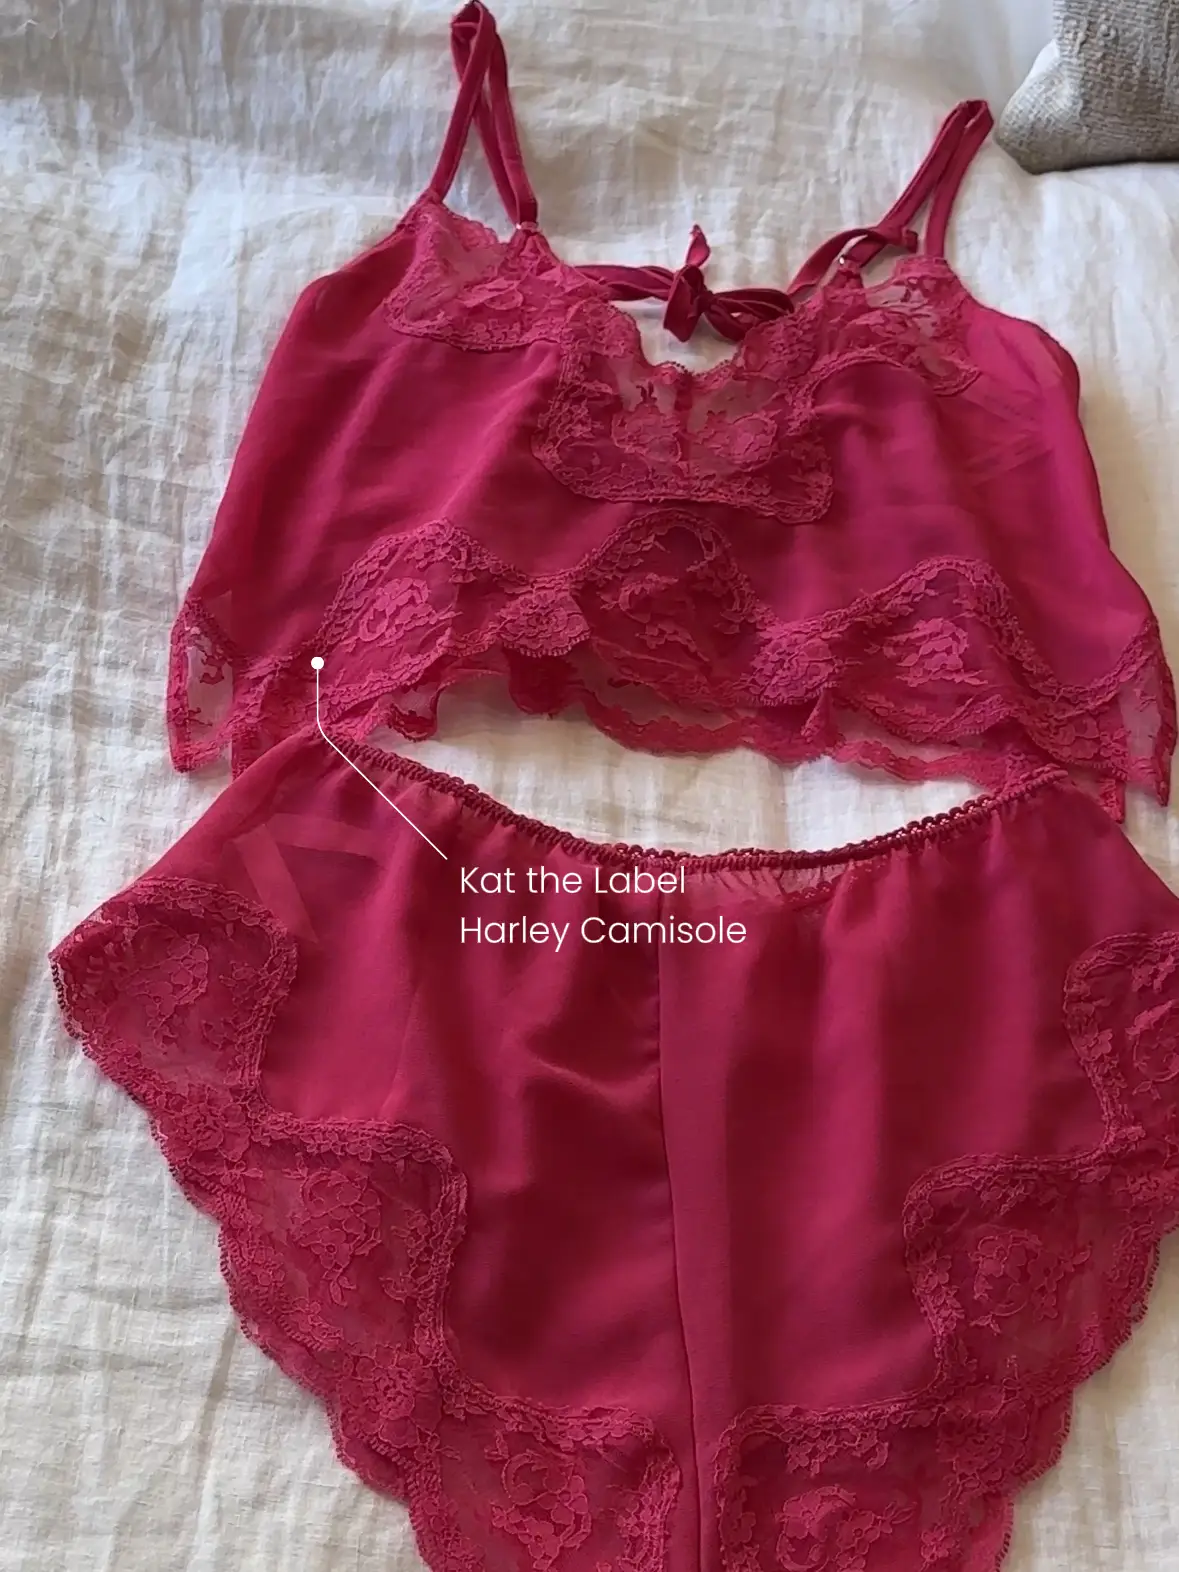 KAT THE LABEL Harley Camisole in Hot Pink